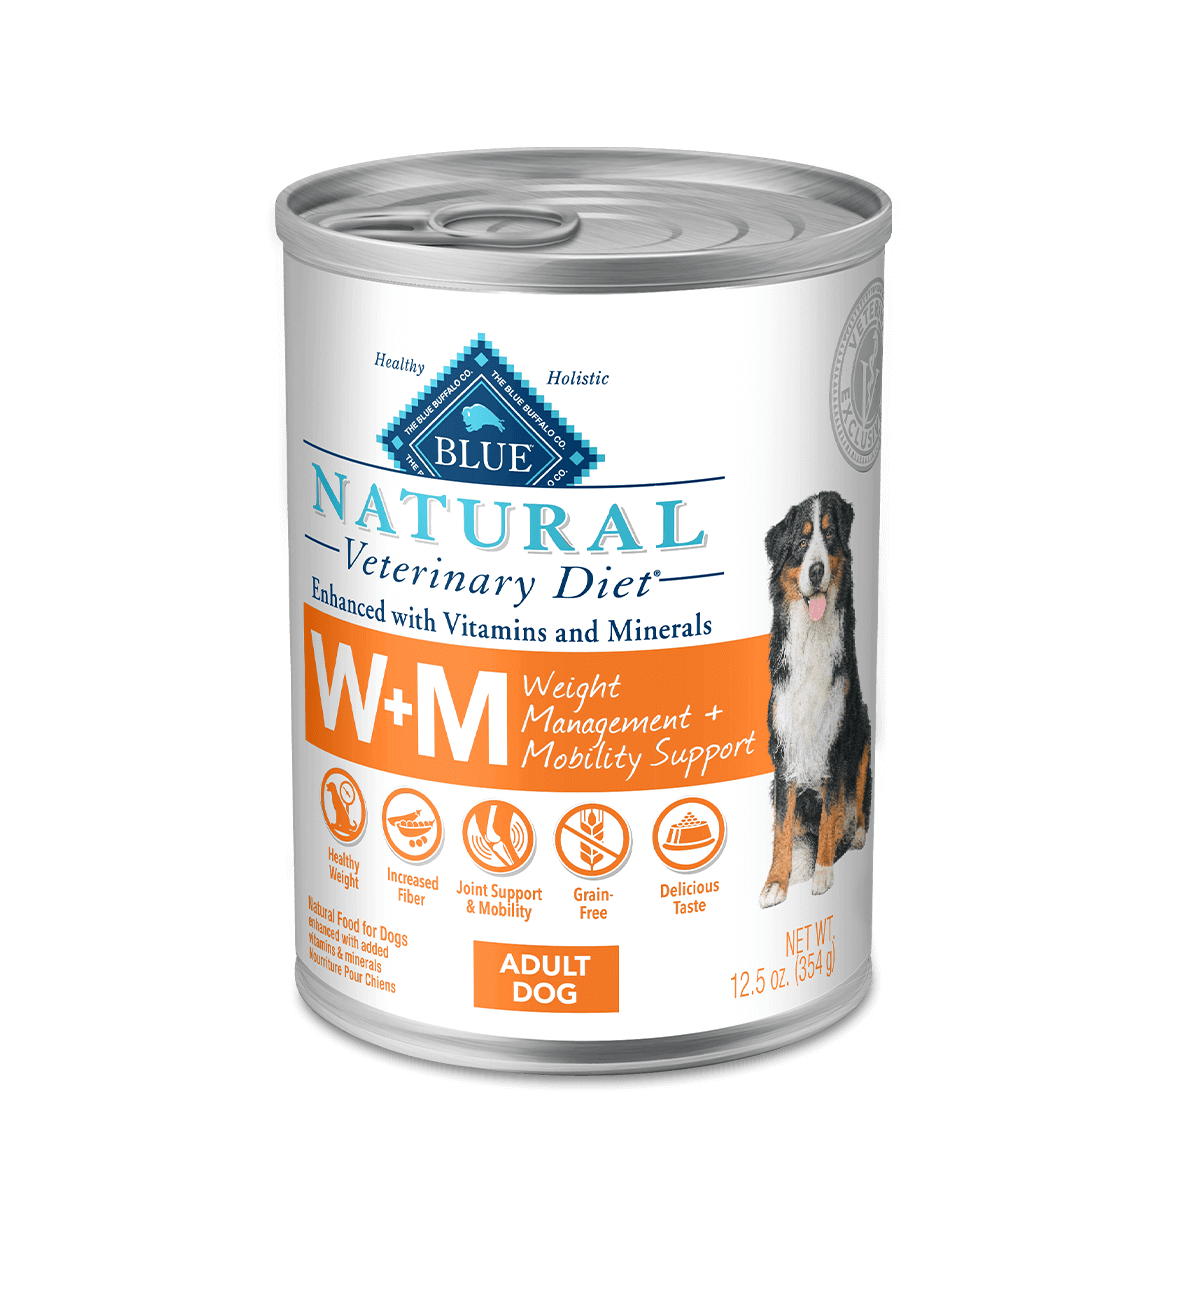 blue natural veterinary diet w+m weight management + mobility support dog wet food